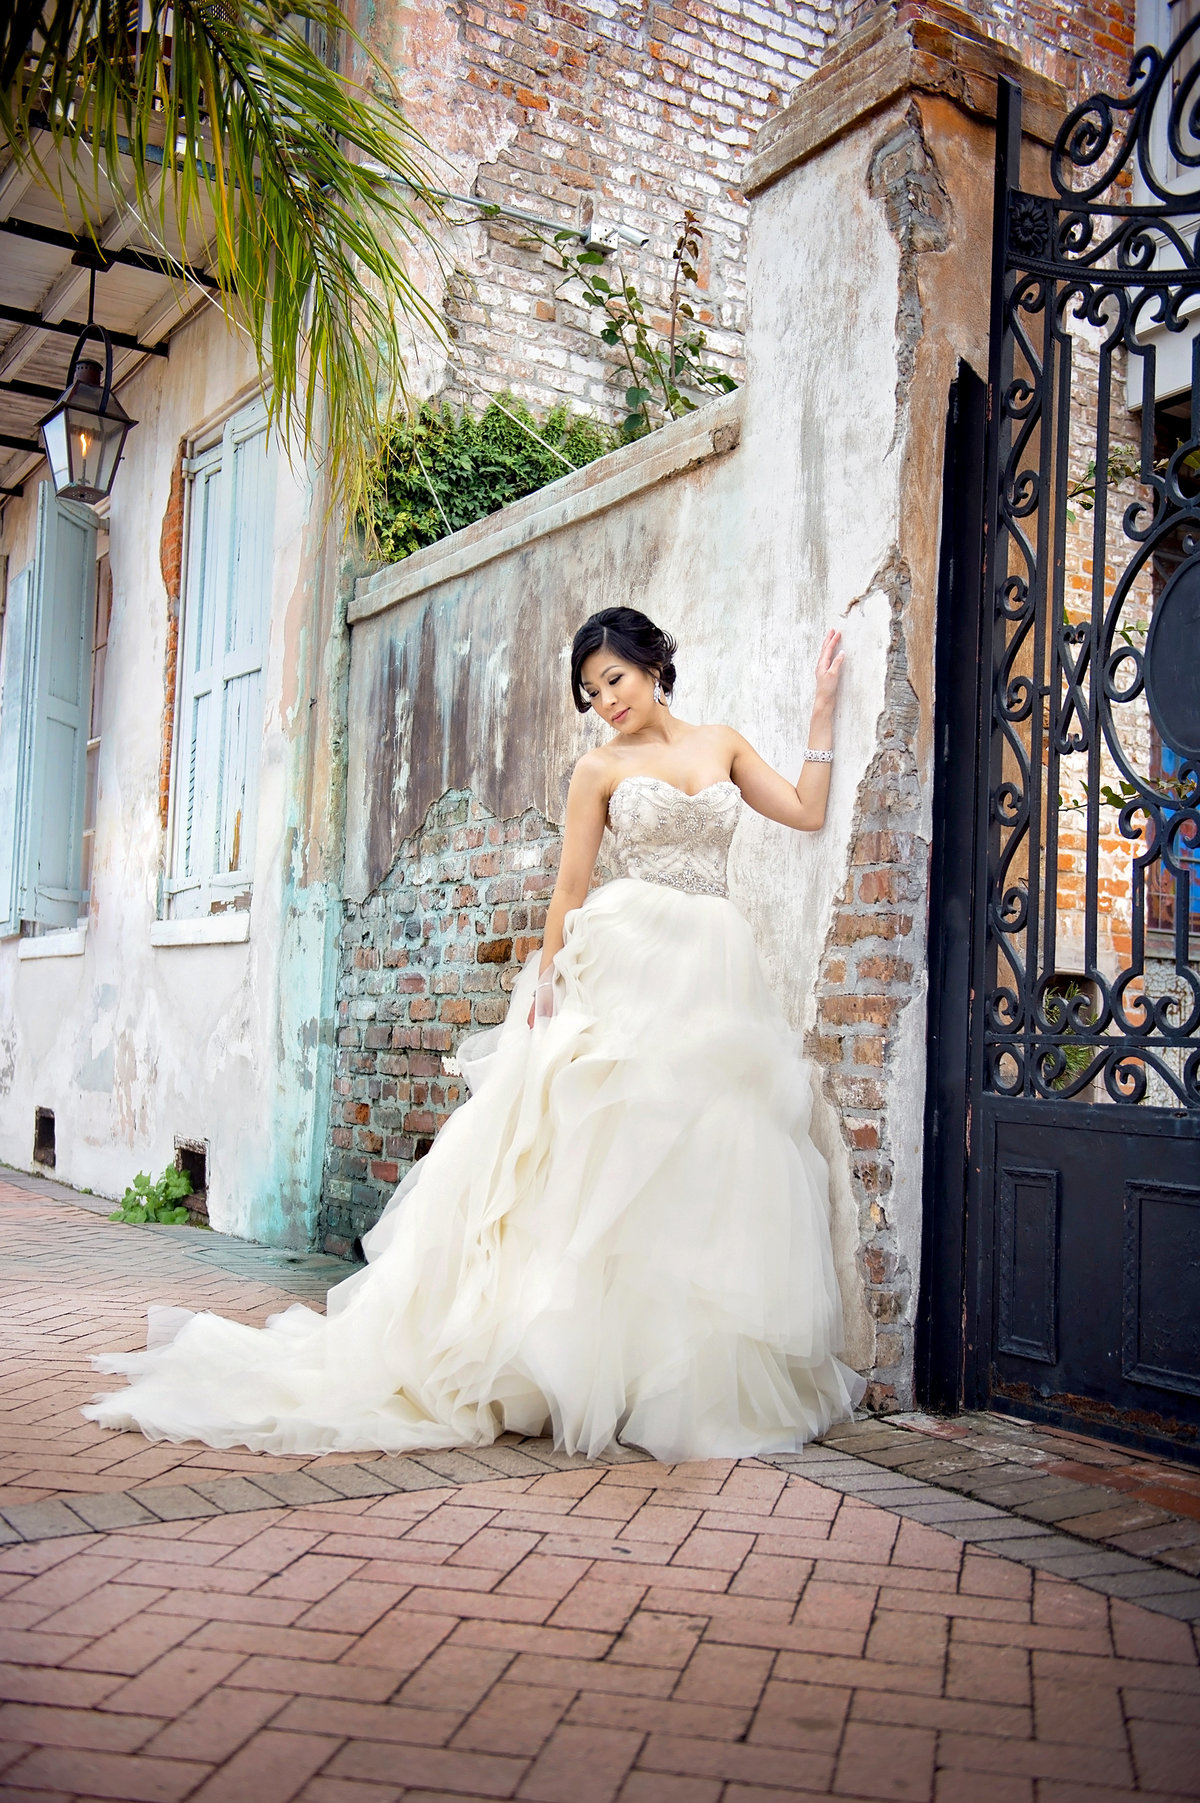 Bride with gas lanterns and brick wall